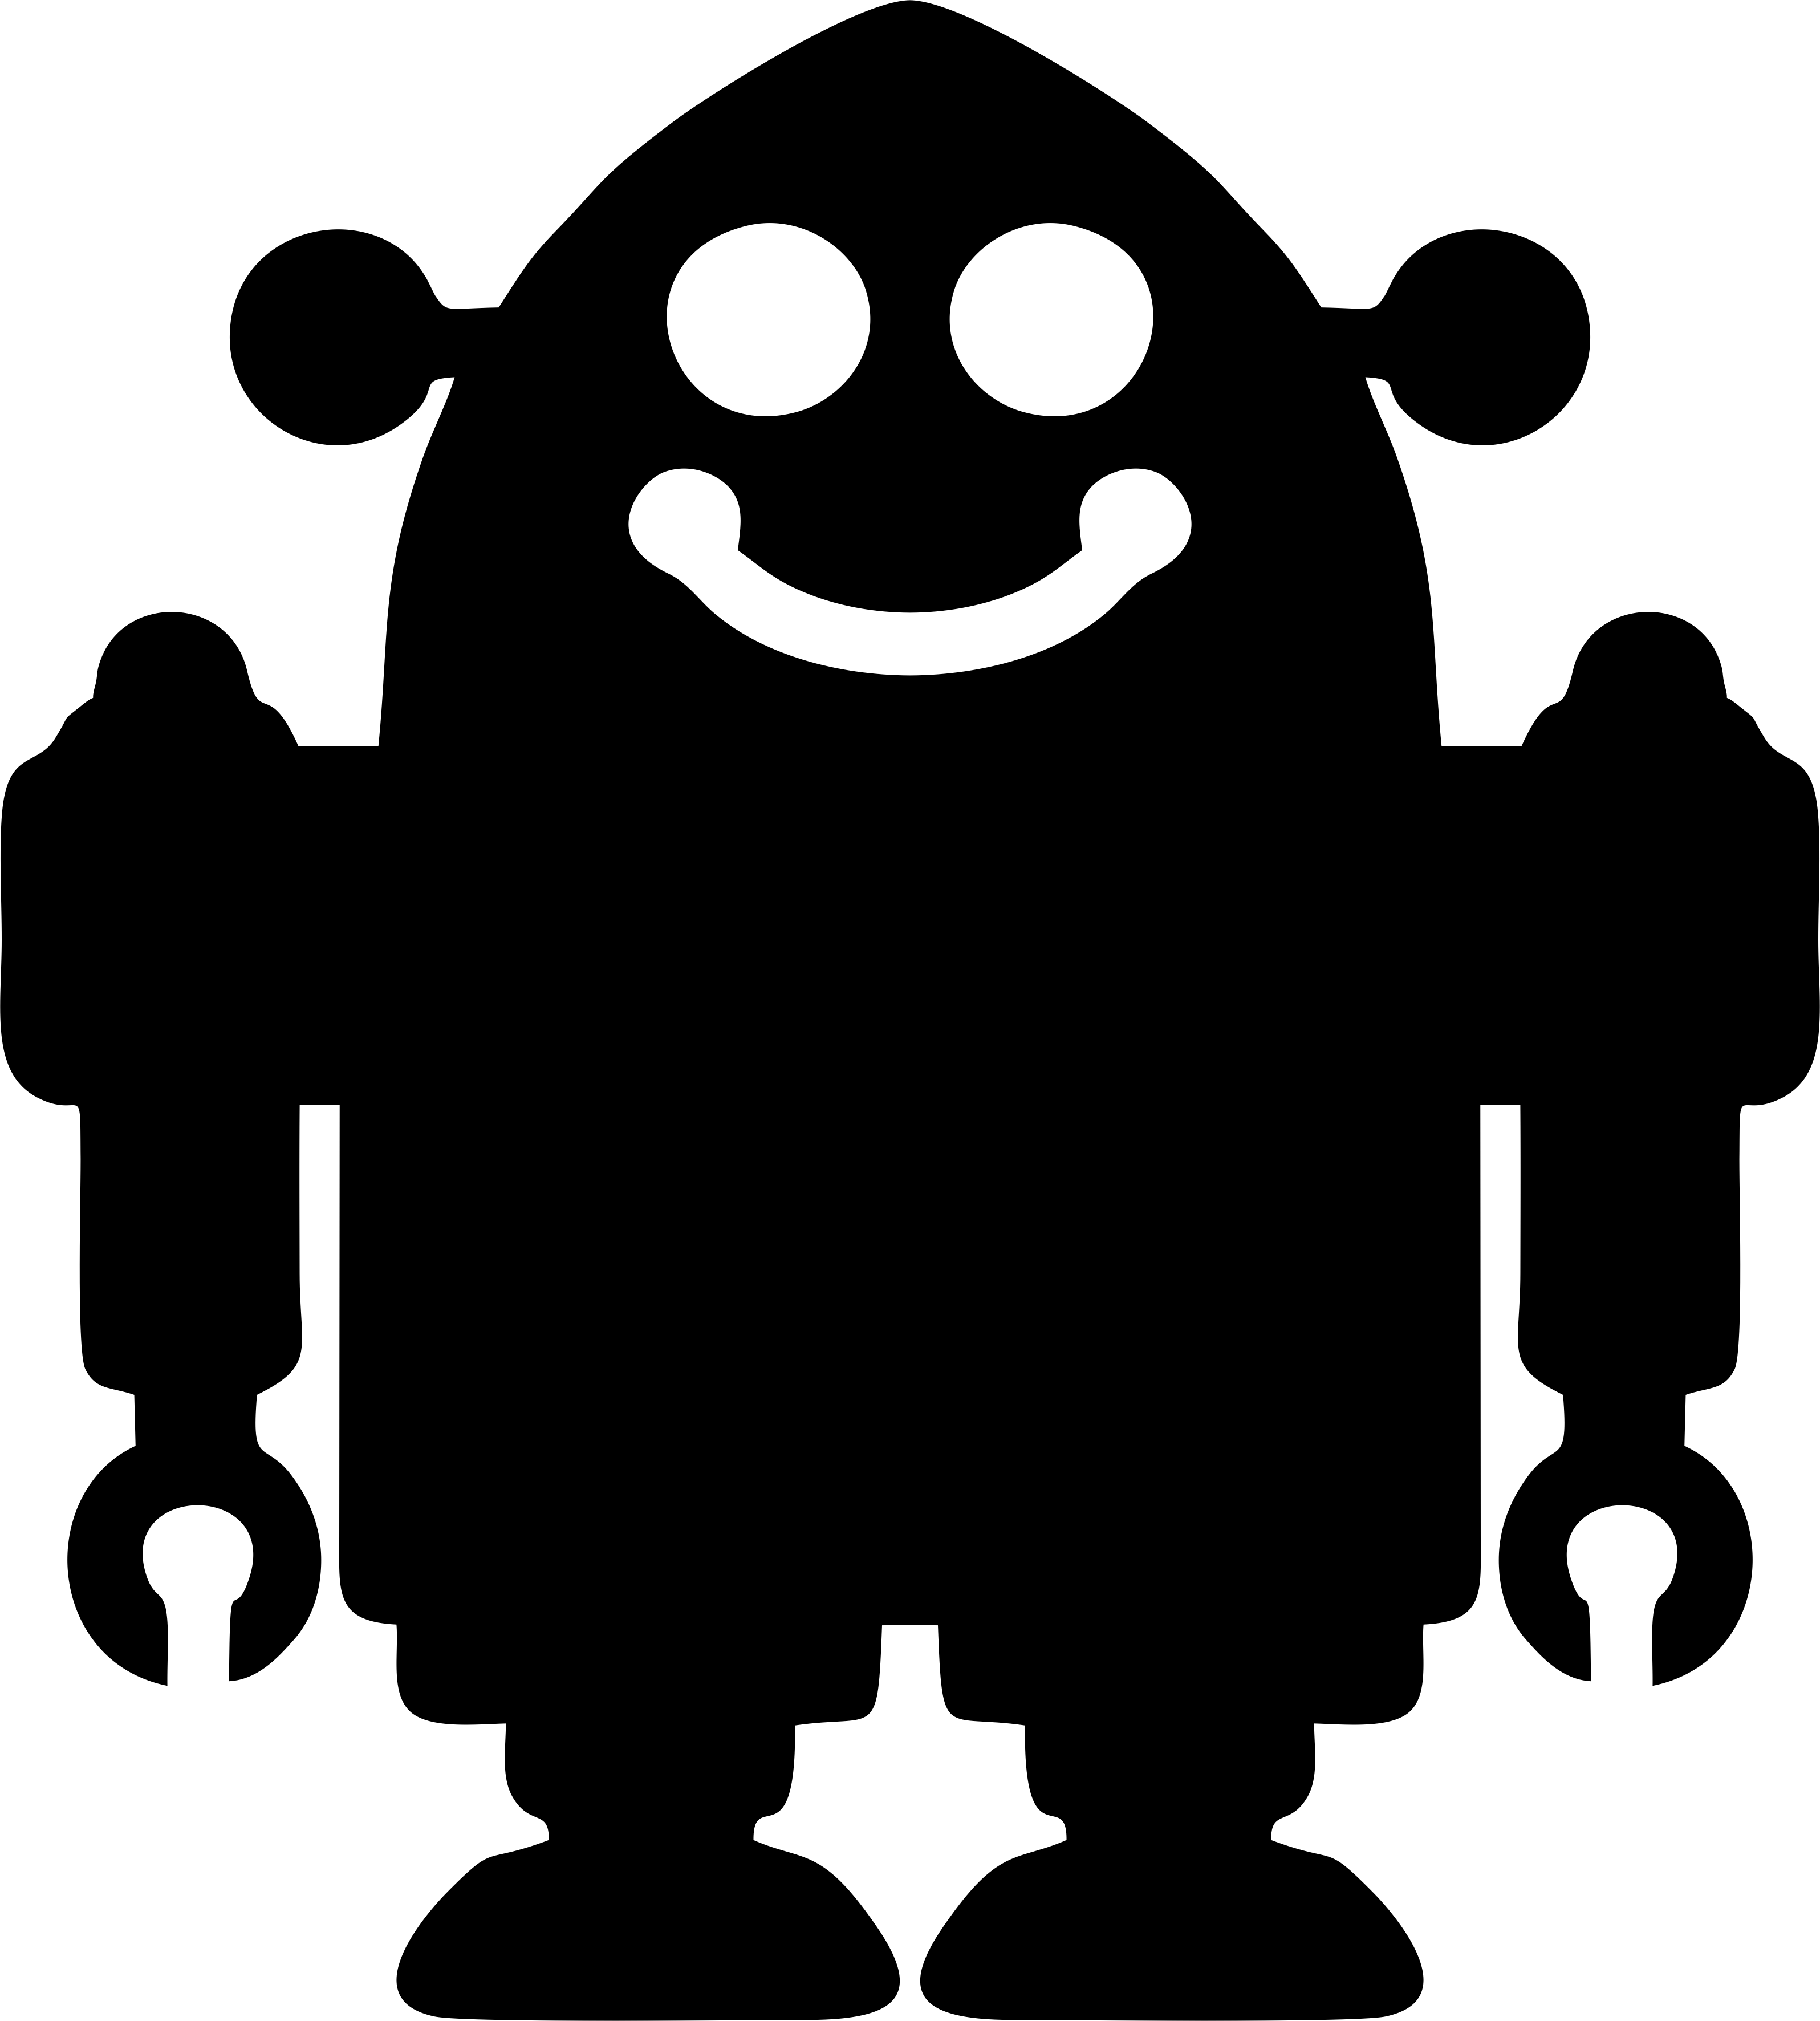 Stickers for Kids: Robot Slate